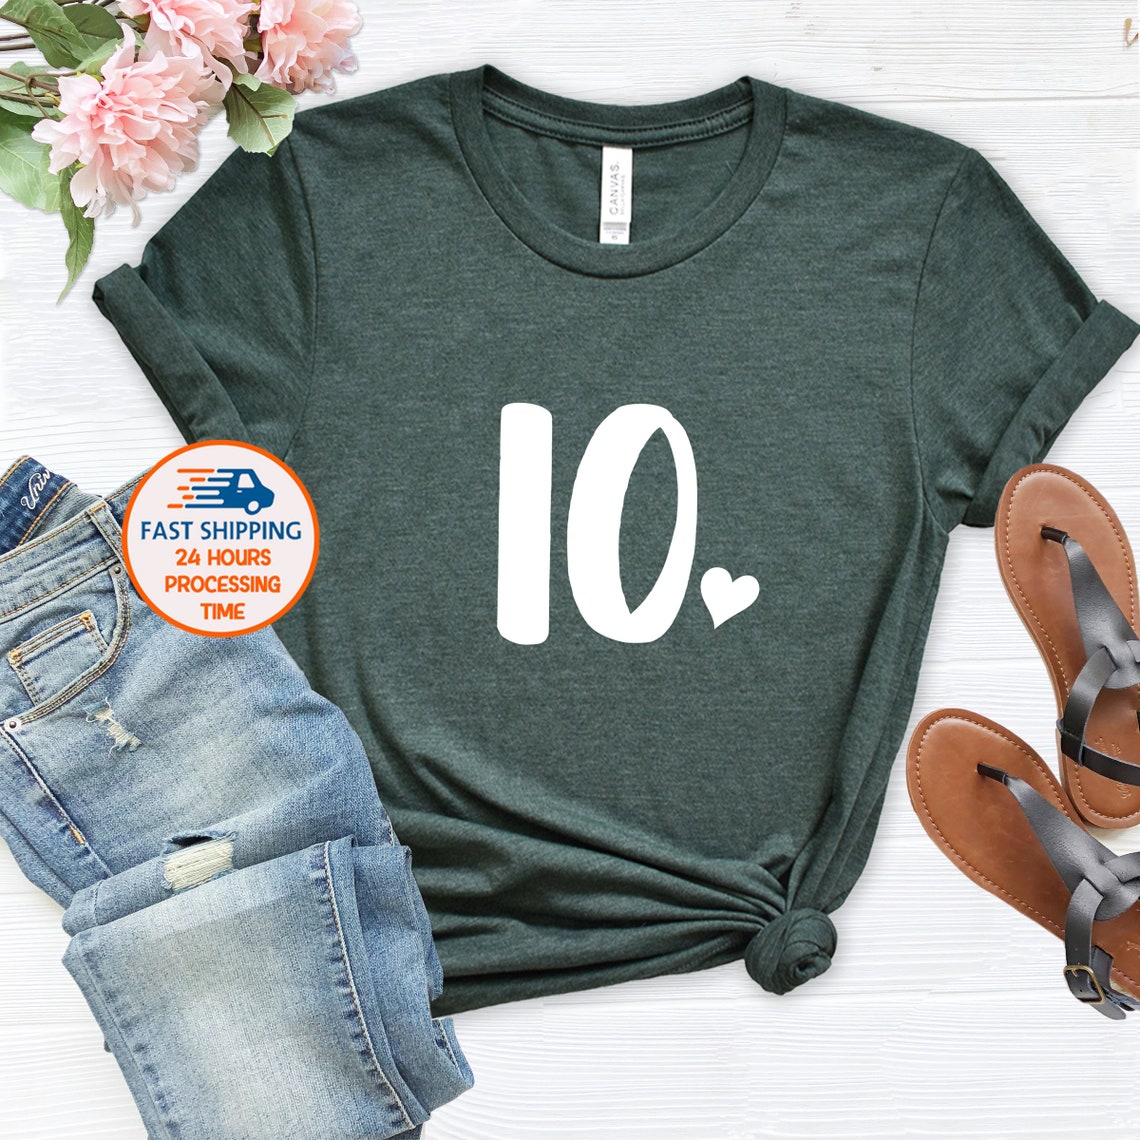 10th Birthday Gift For Girl, 10th Birthday Event Shirts